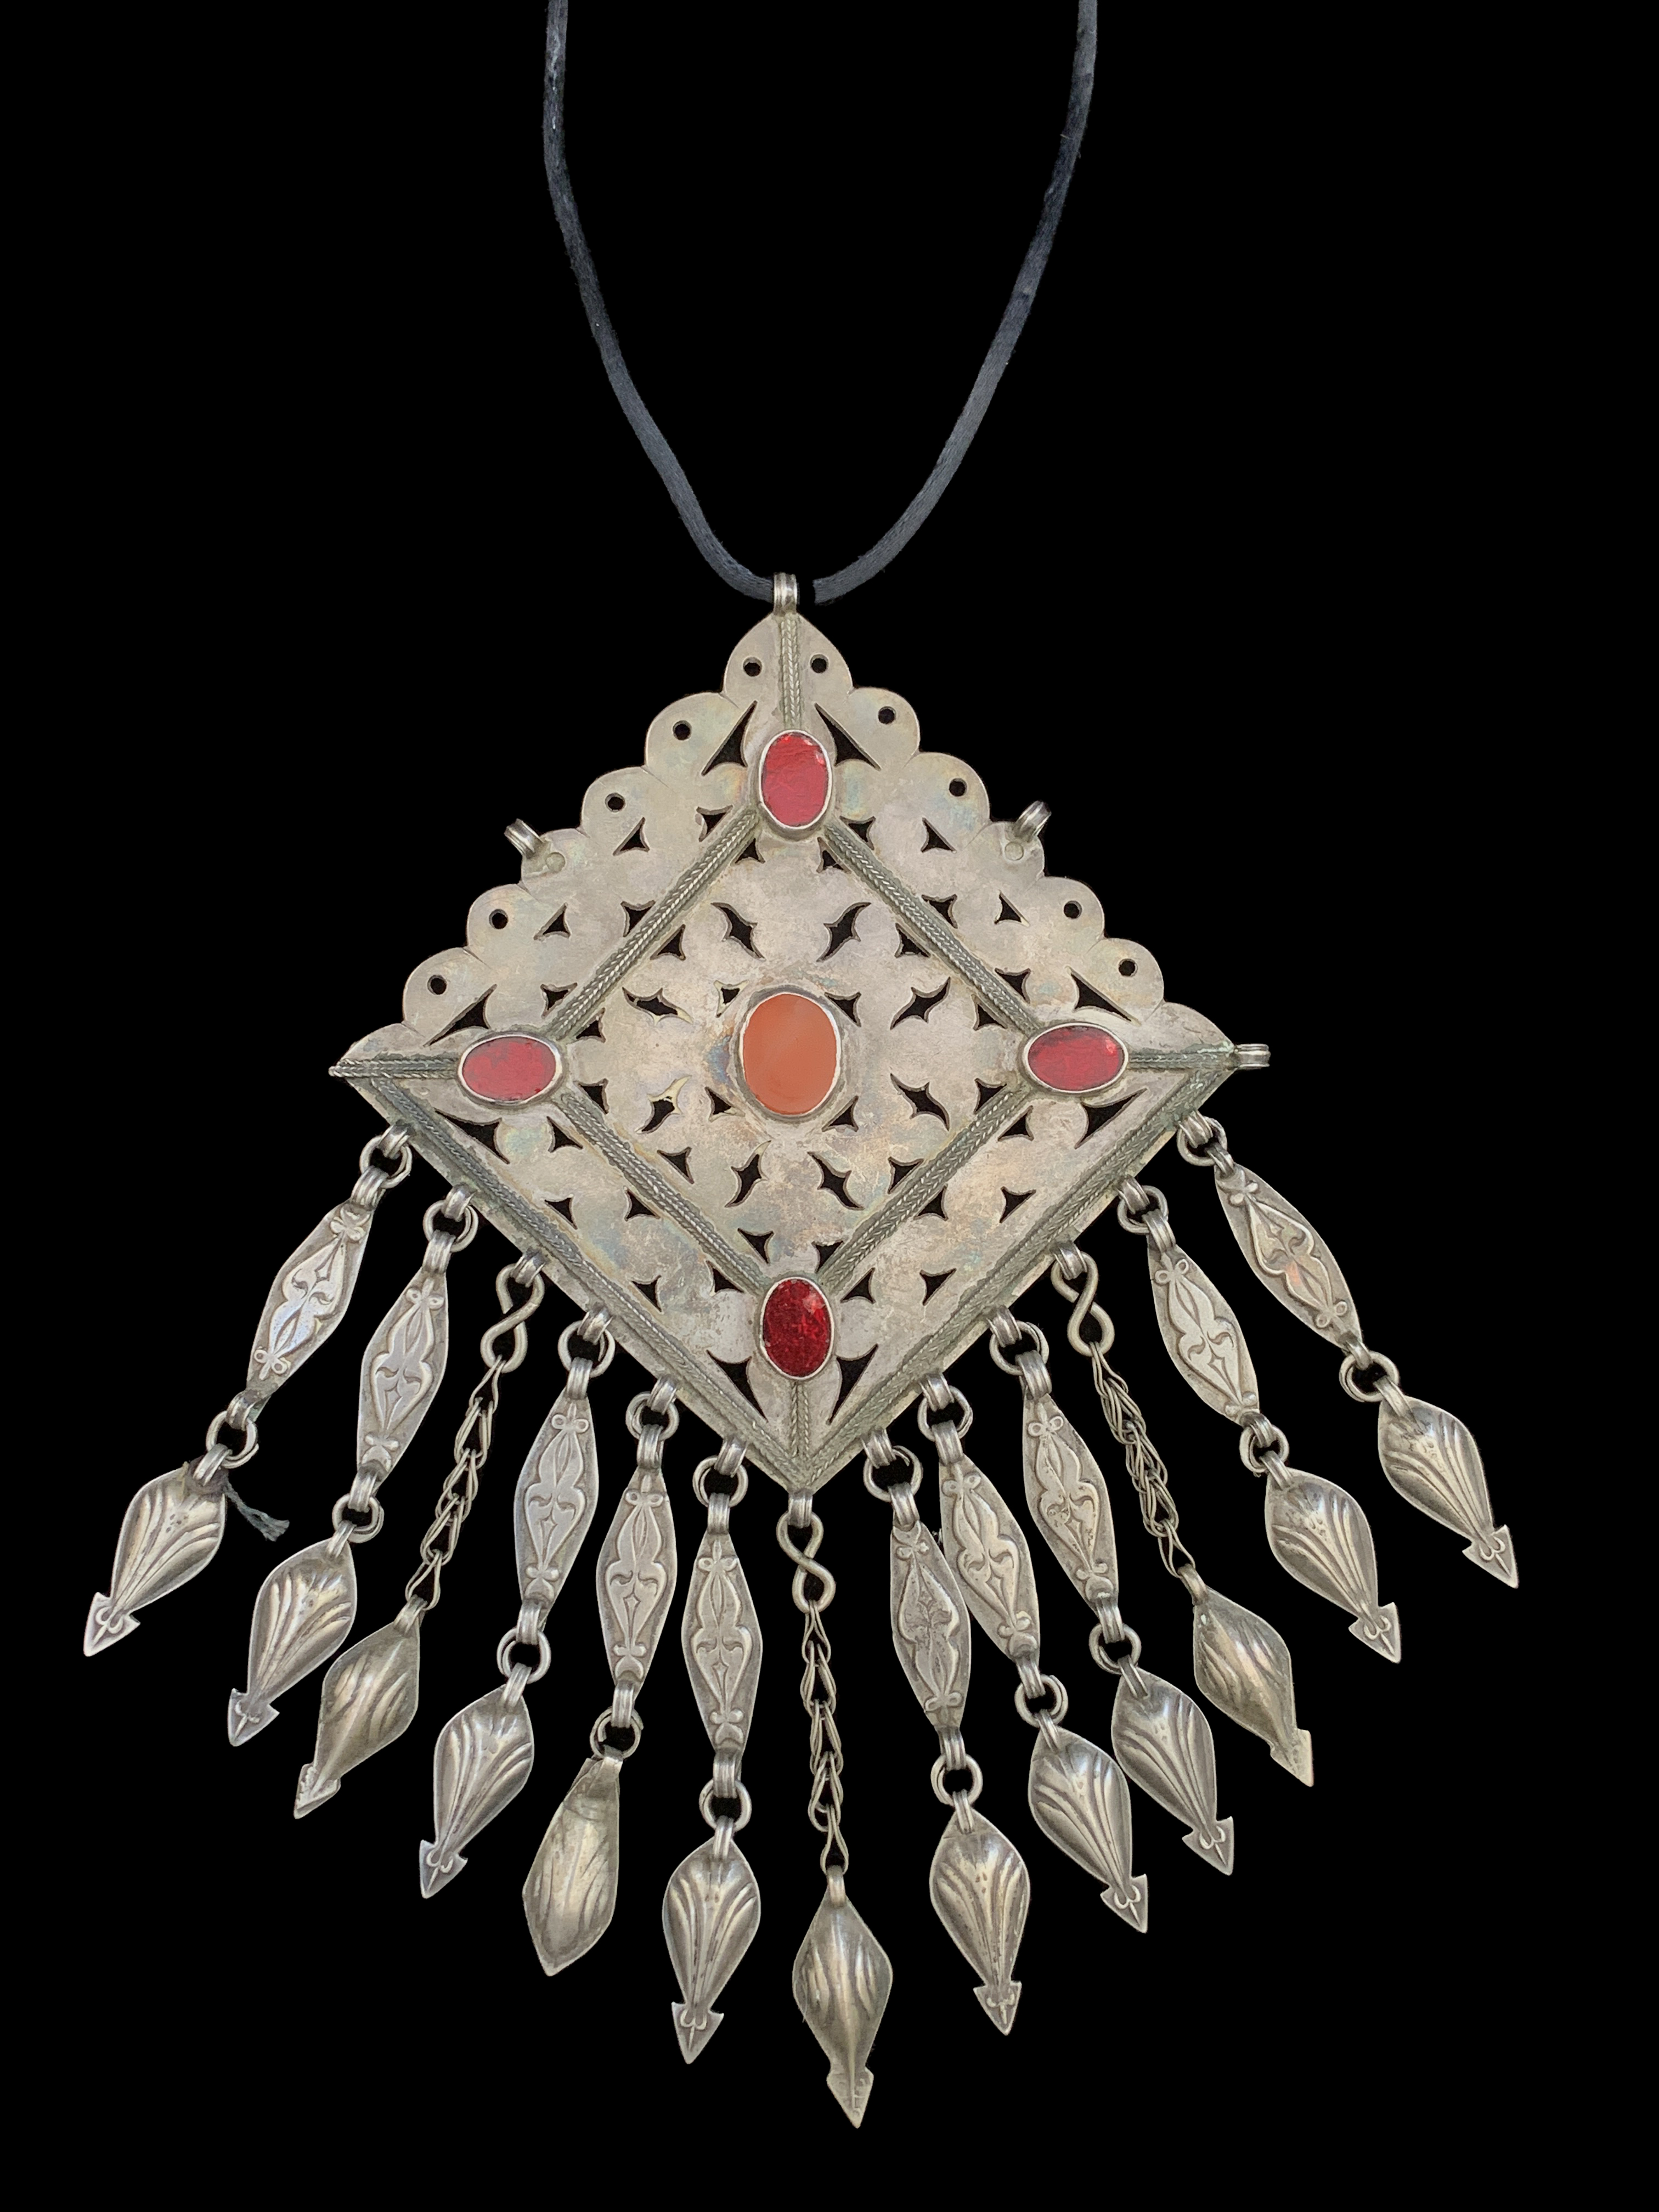 Necklace made from a Robe Fastener - Tekke people, Turkmenistan (Central Asia)